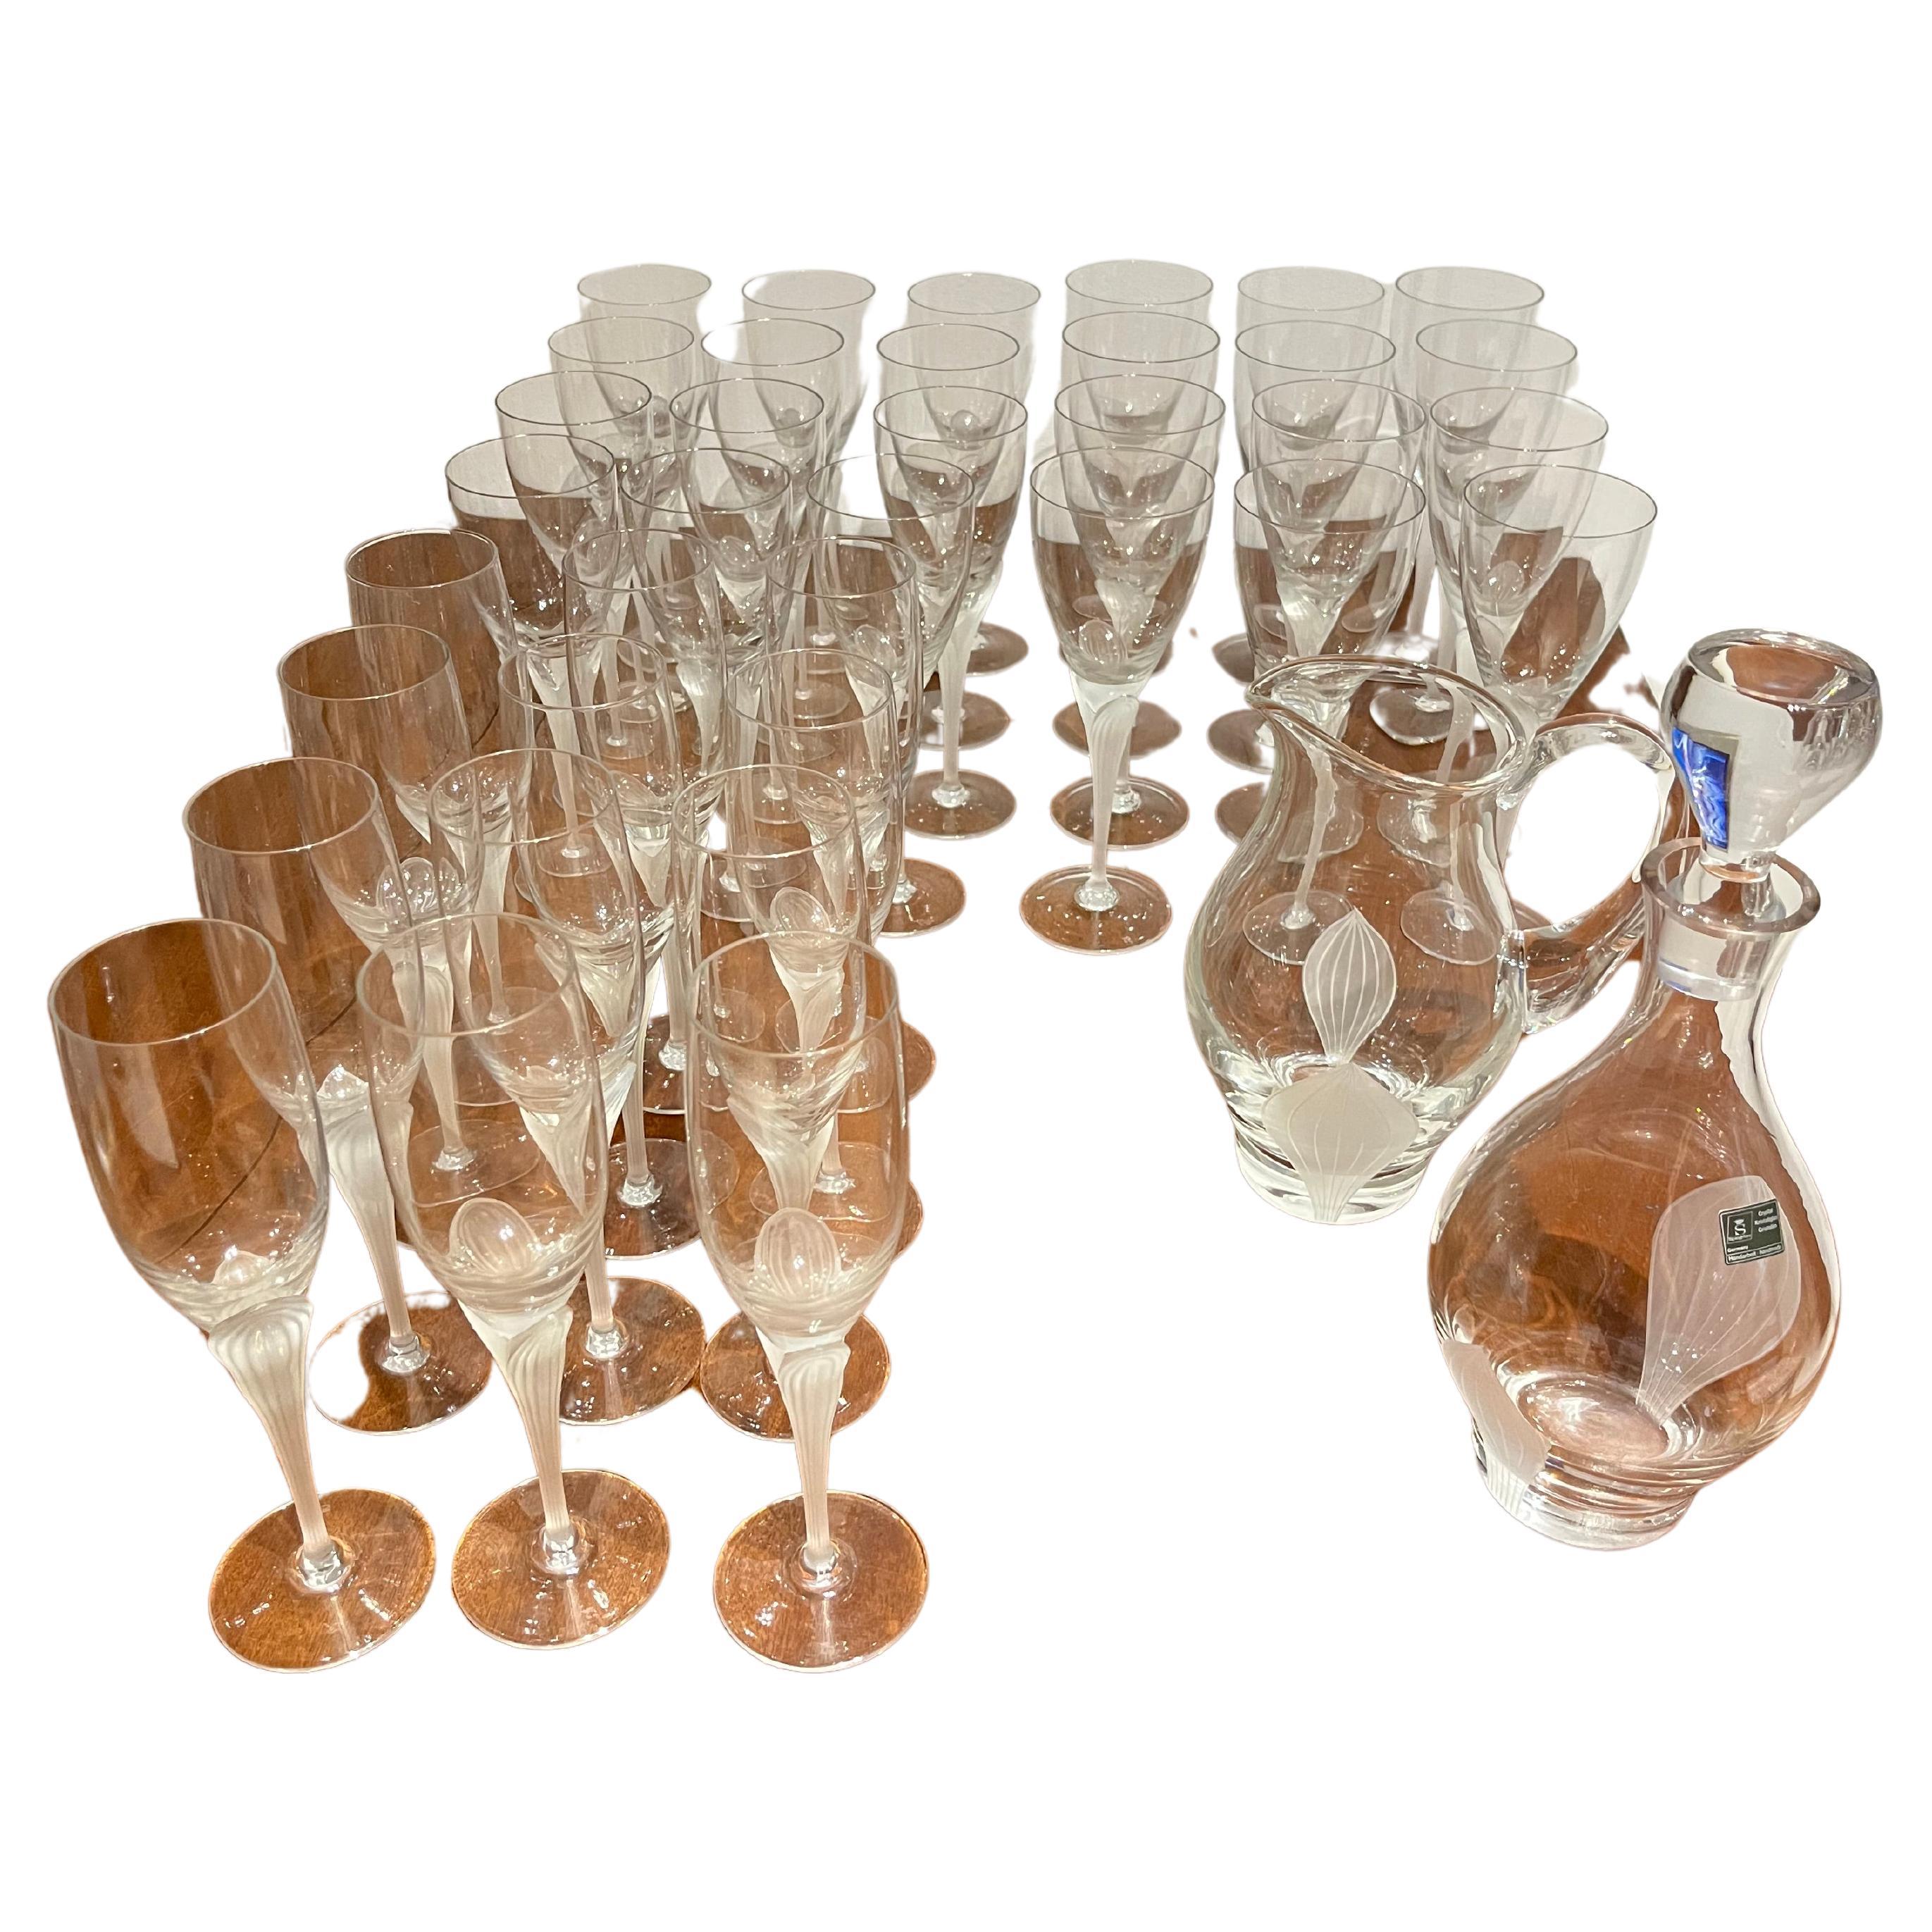 https://a.1stdibscdn.com/rosenthal-crystal-glass-set-iris-model-38-pieces-intact-never-used-1990s-for-sale/f_83792/f_370563621699803351090/f_37056362_1699803352358_bg_processed.jpg